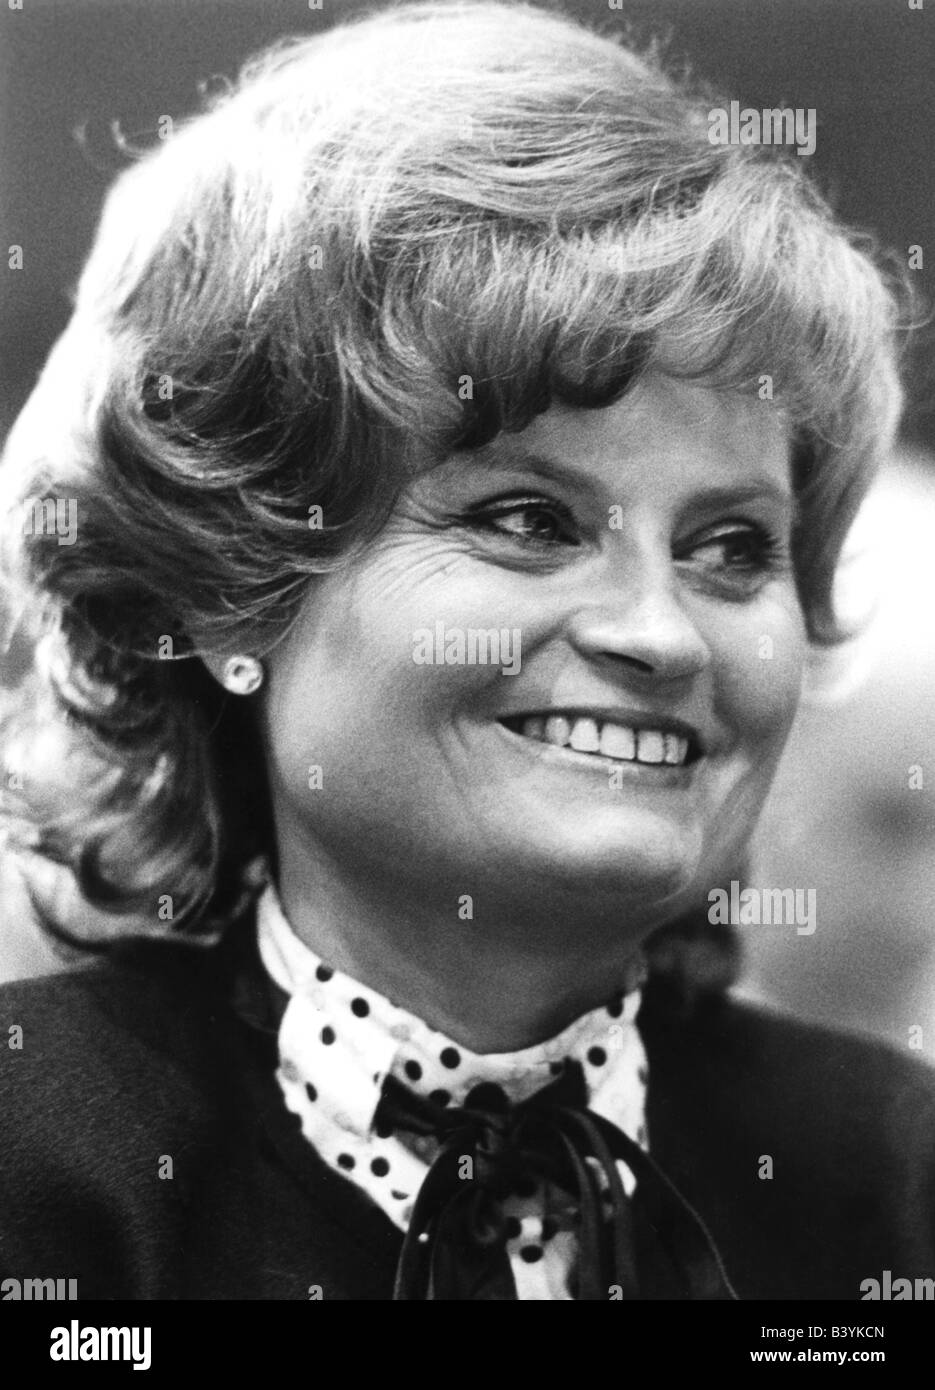 Kohl, Hannelore, 7.3.1933 - 5.7.2001, at party conference of CDU, Essen, Grugahalle, 20. - 22.3.1985, portrait, Stock Photo